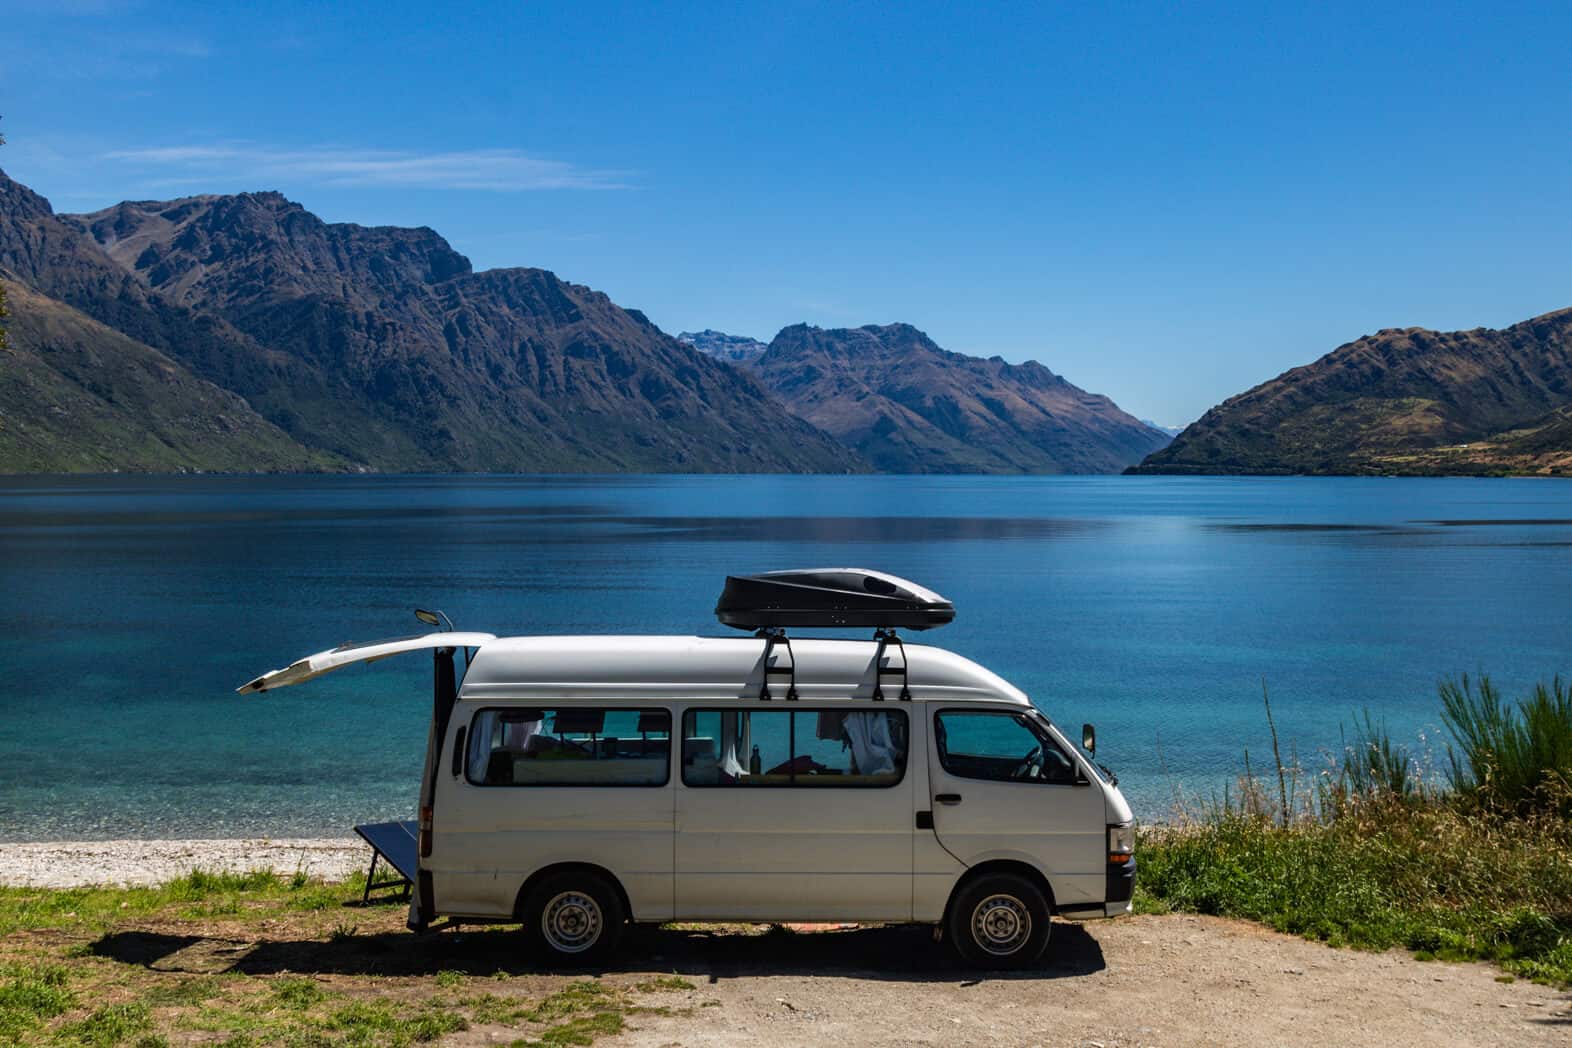 Planning a road trip while in my van in New Zealand